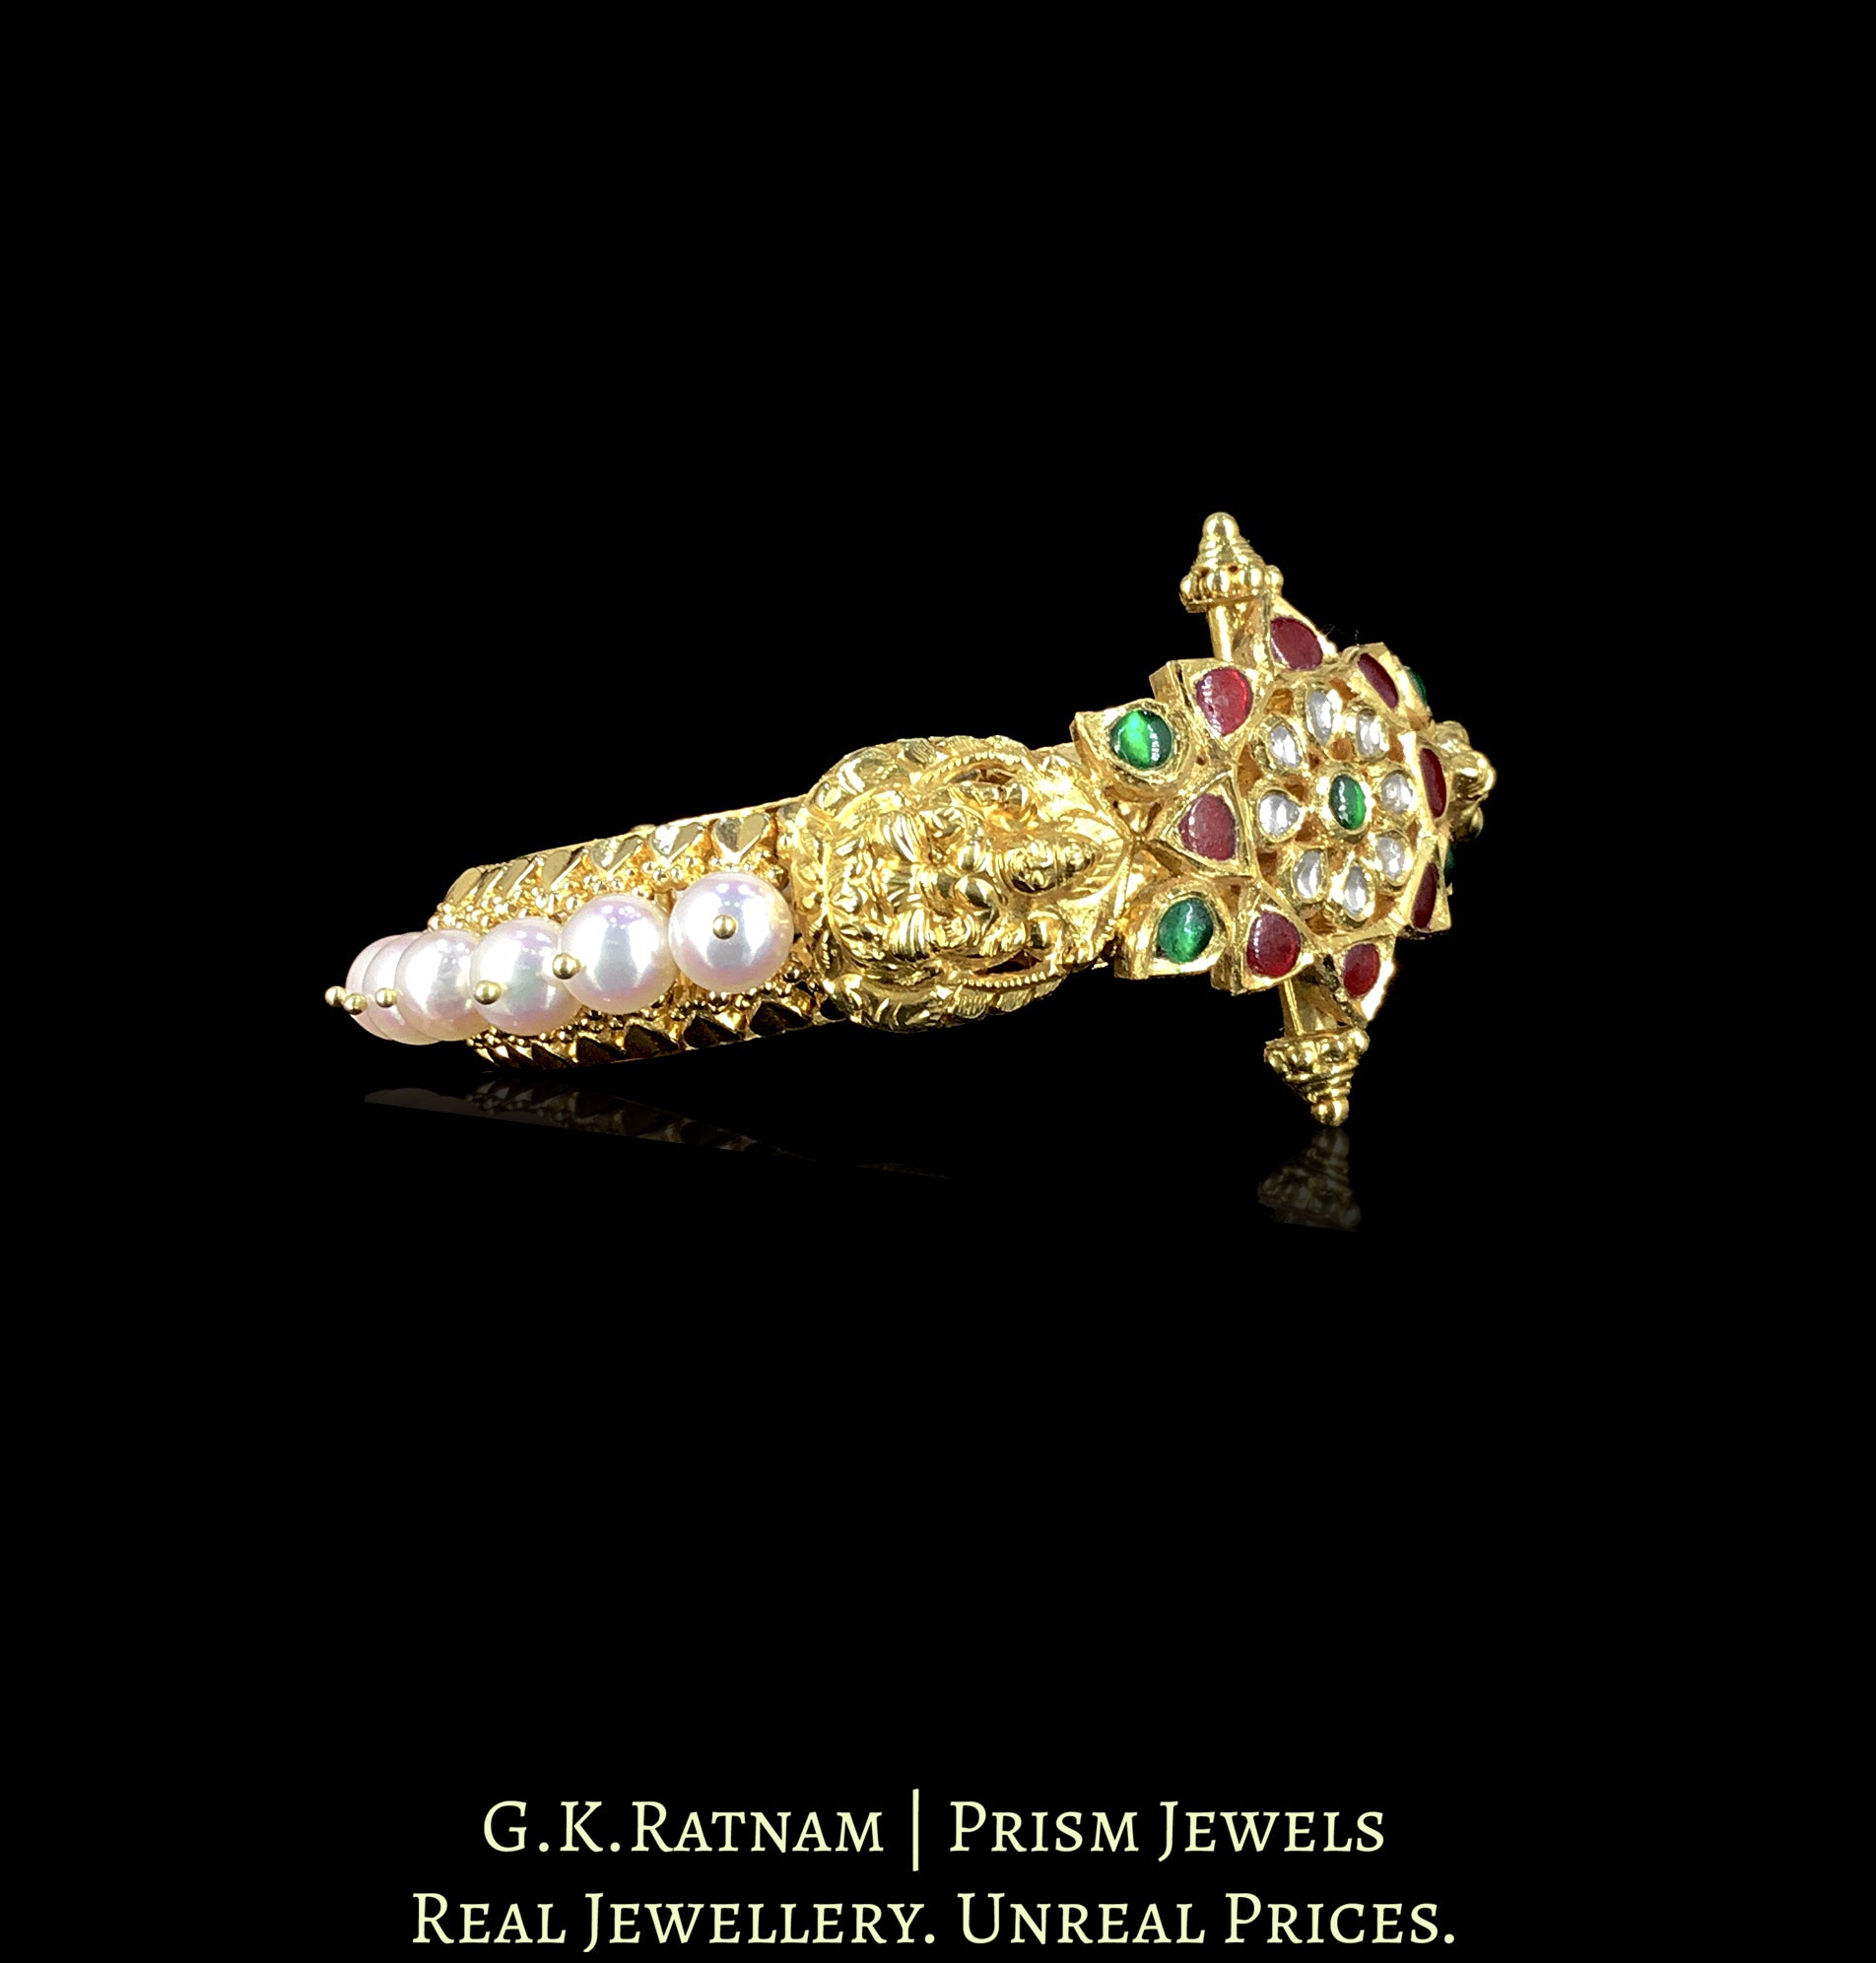 22k Gold and Diamond Polki south-style Bangle with Pearls